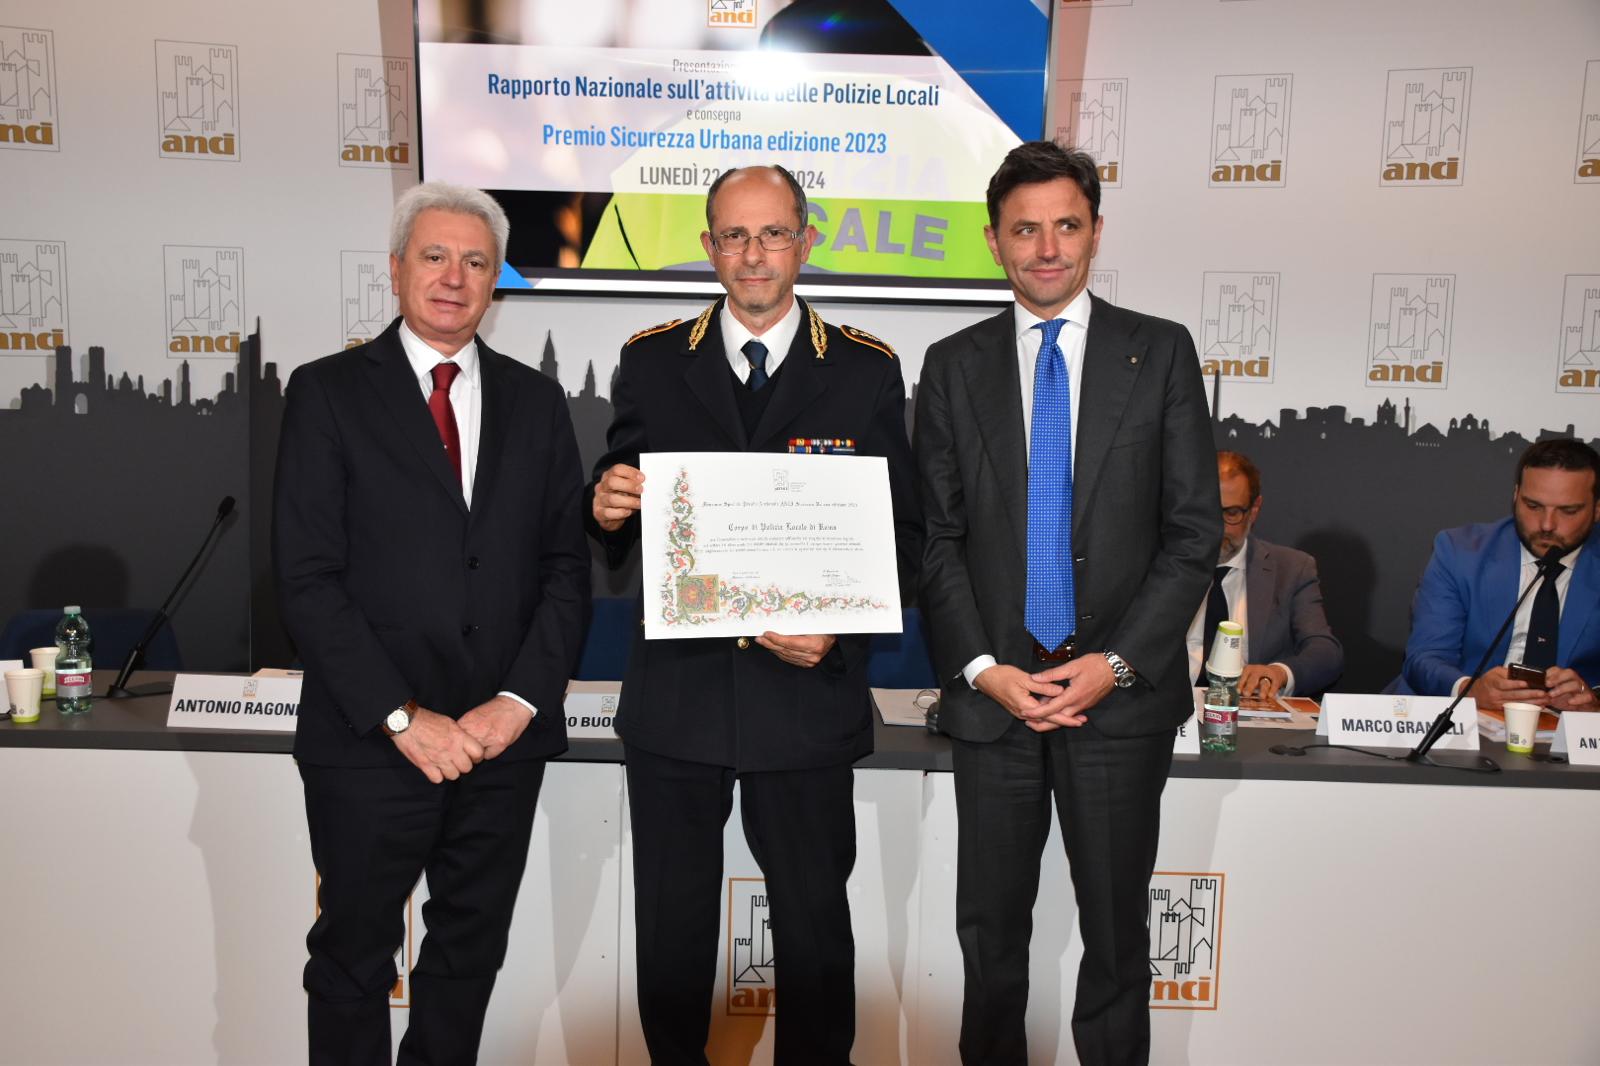 Roma Capitale obtains the Urban Safety award ANCI 2023 thanks to Safety21